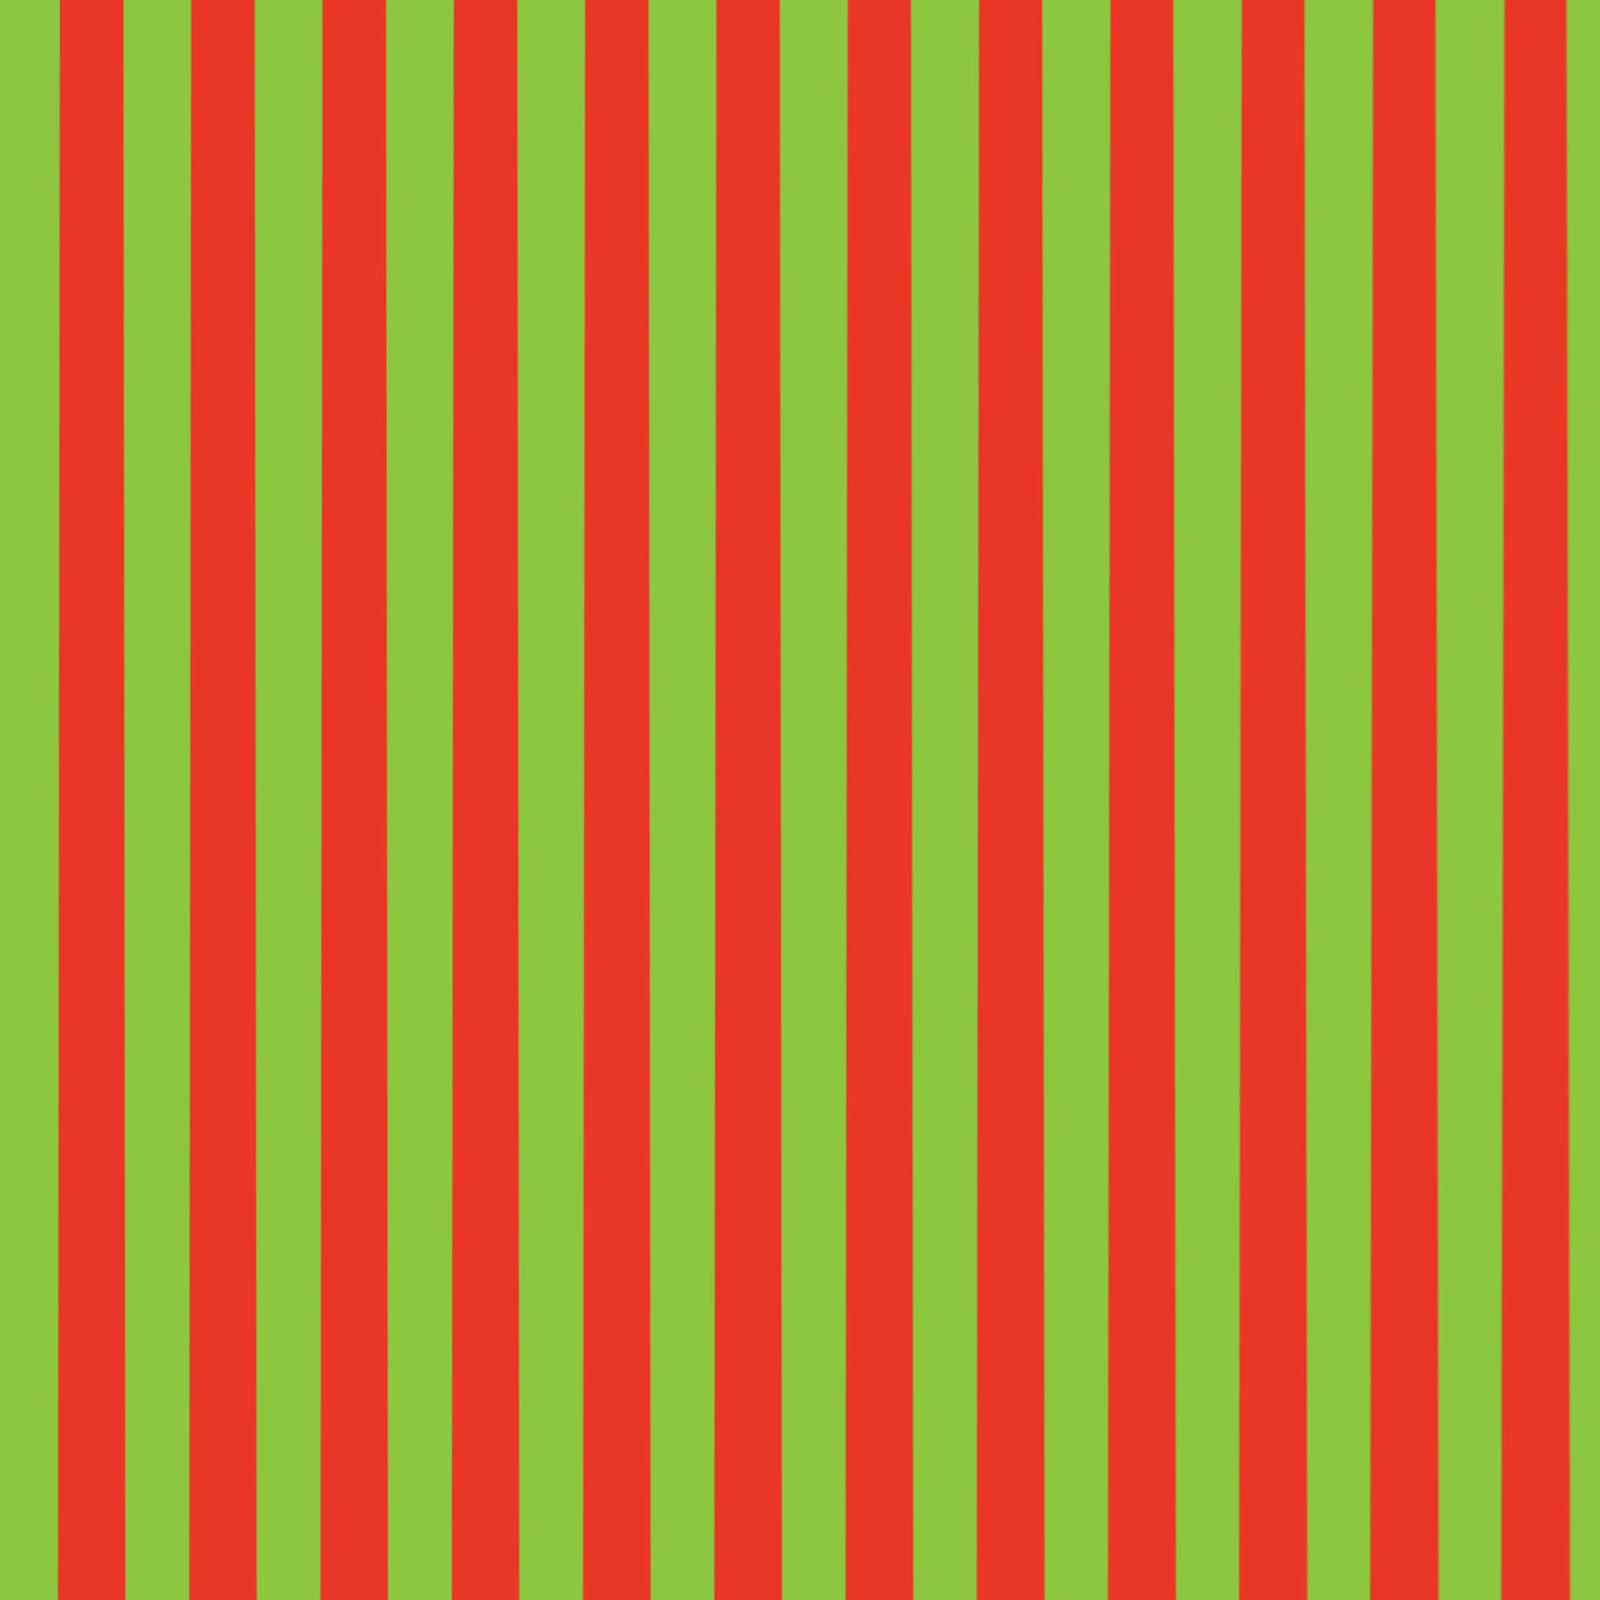 Stampin DAmour FREE Digi Scrapbook Paper   Green and Red Stripes